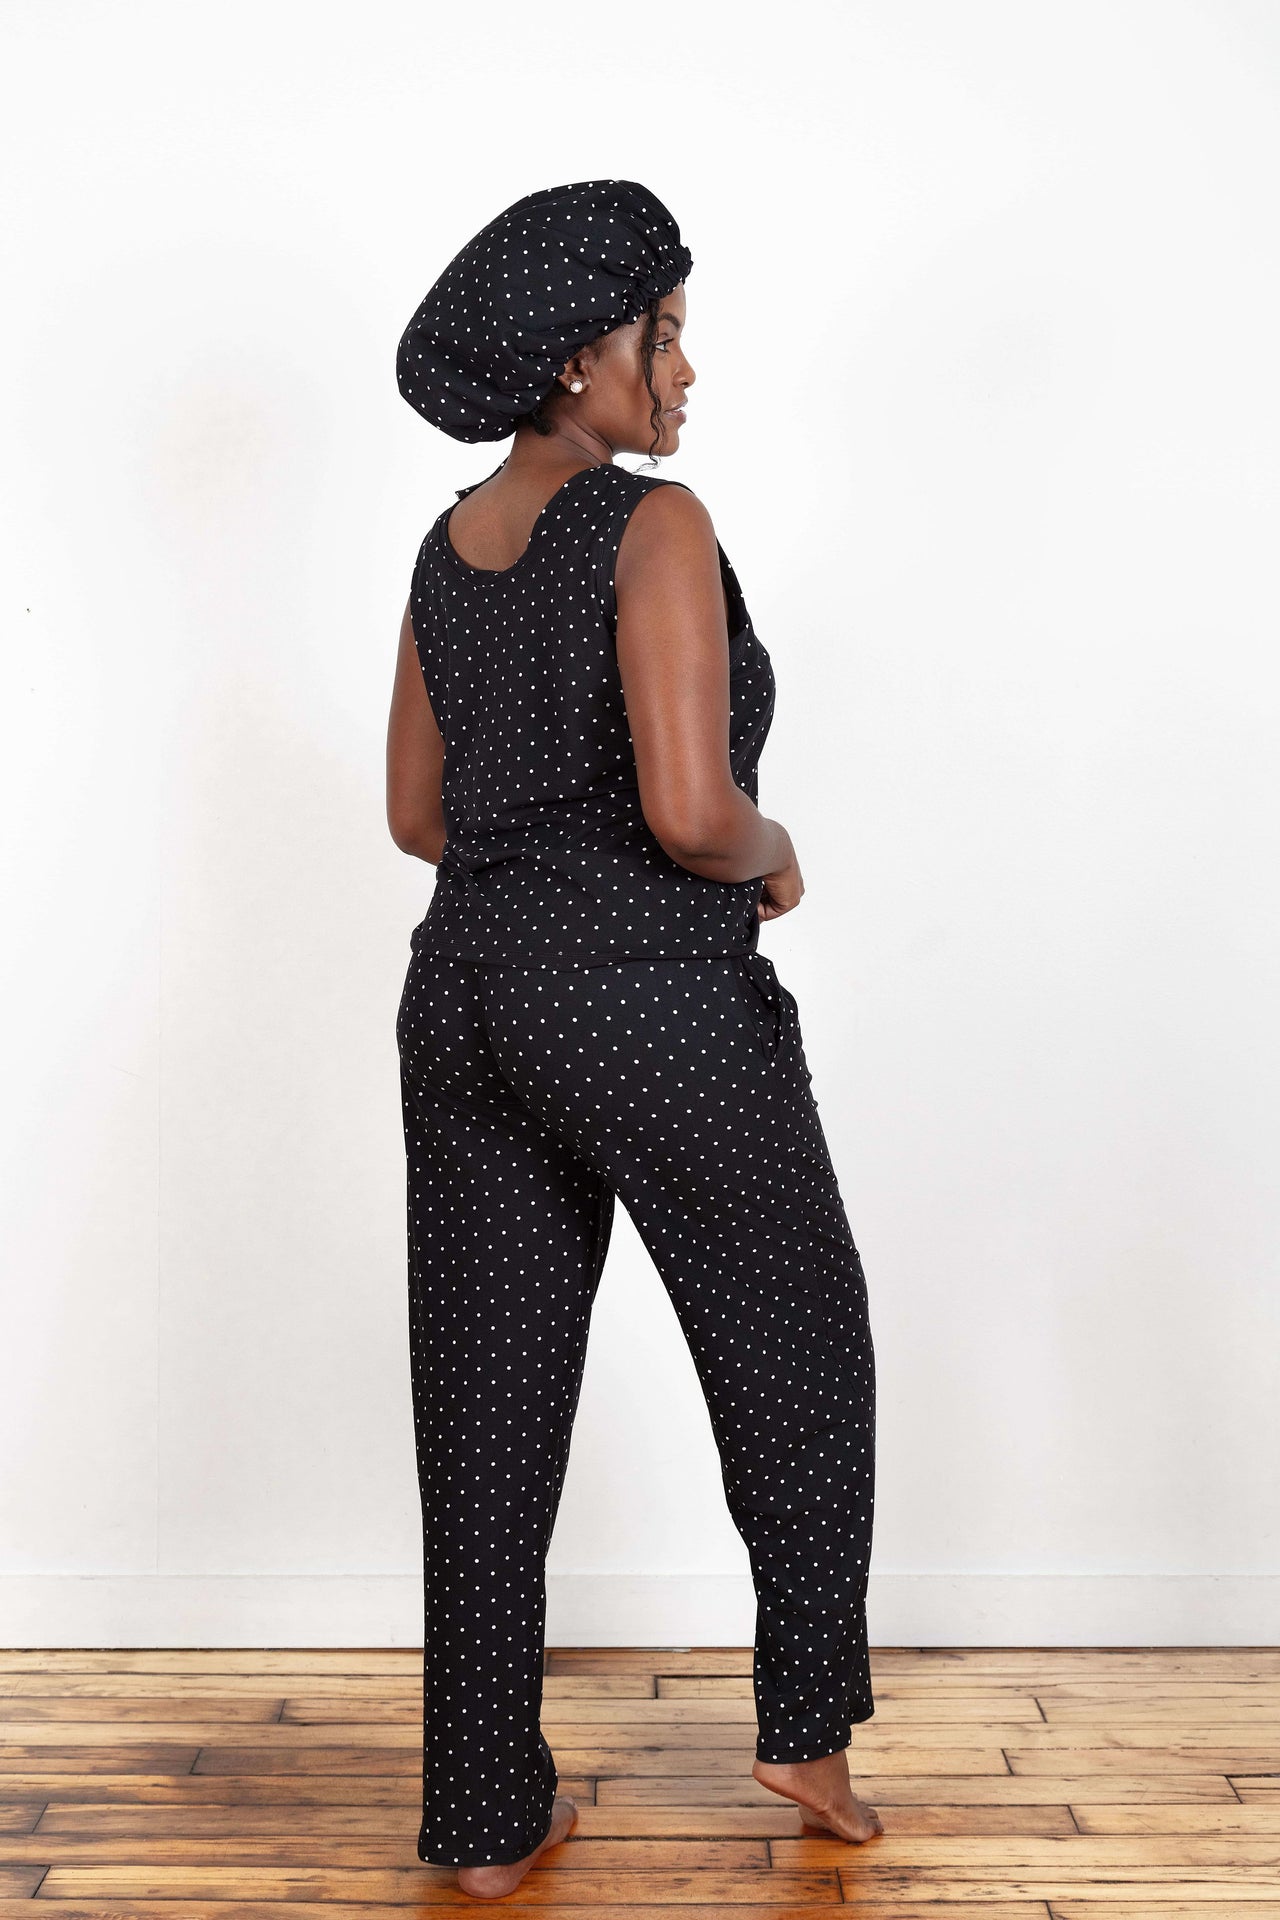 Soft and comfy Bamboo fabric, Black and White Polka Dots women's sleepwear/loungewear. Women's Pajama pants set with a Matching satin-lined bonnet.